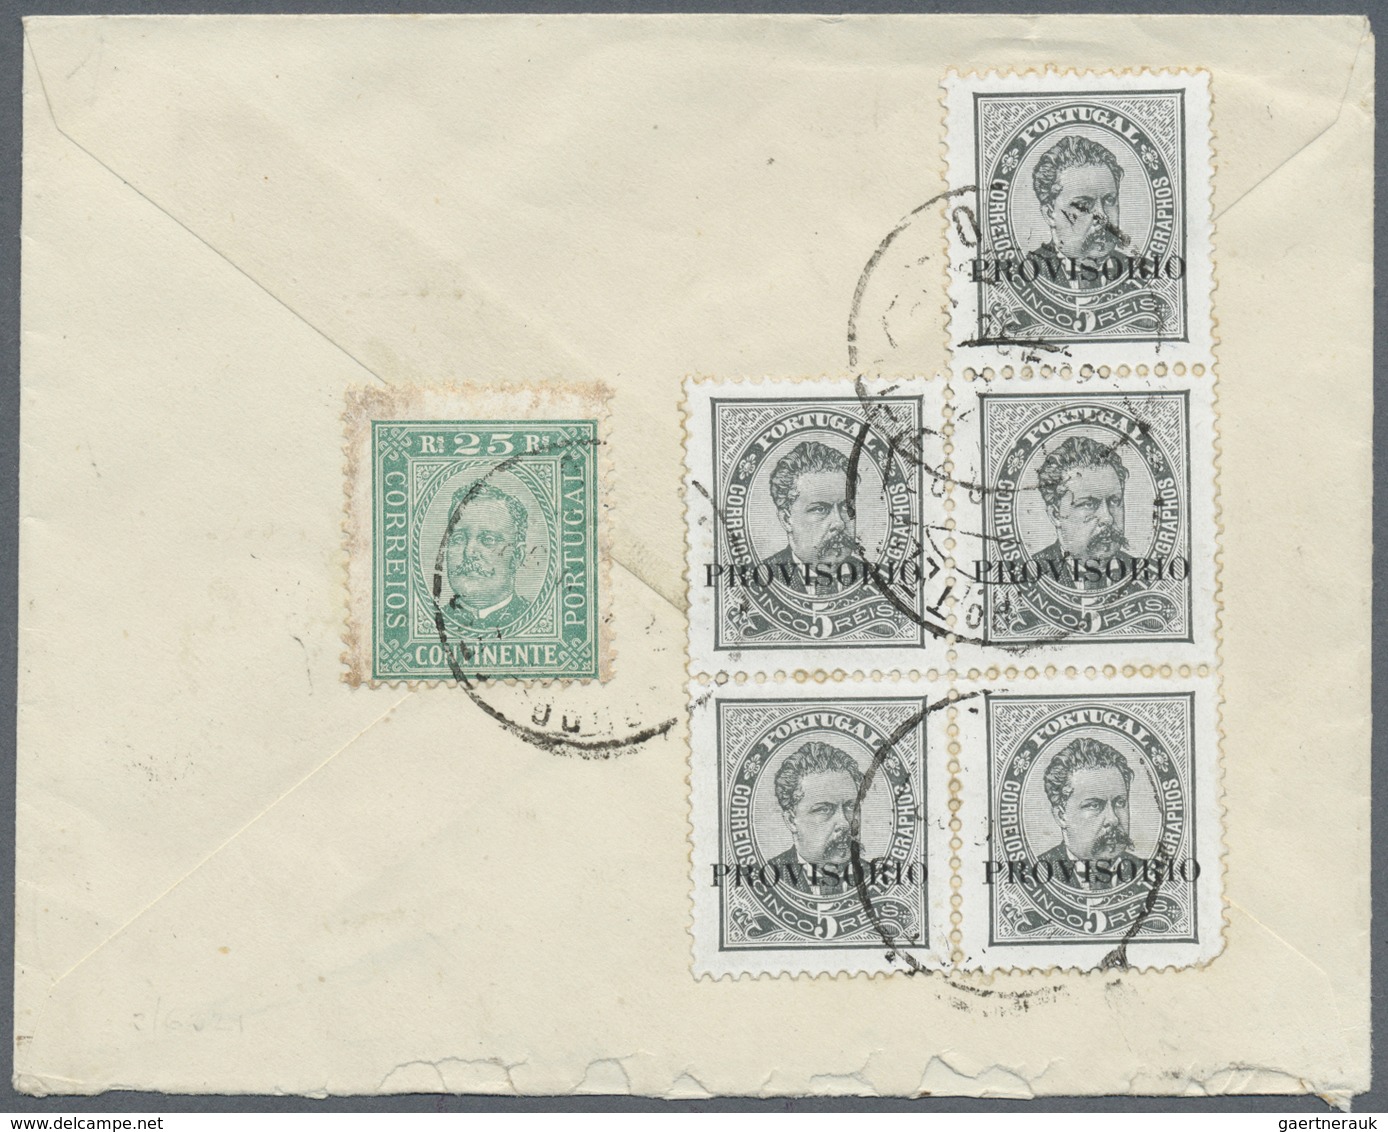 Br Portugal: 1855/1940, group of eleven better entires, mainly before 1900 showing attractive frankings